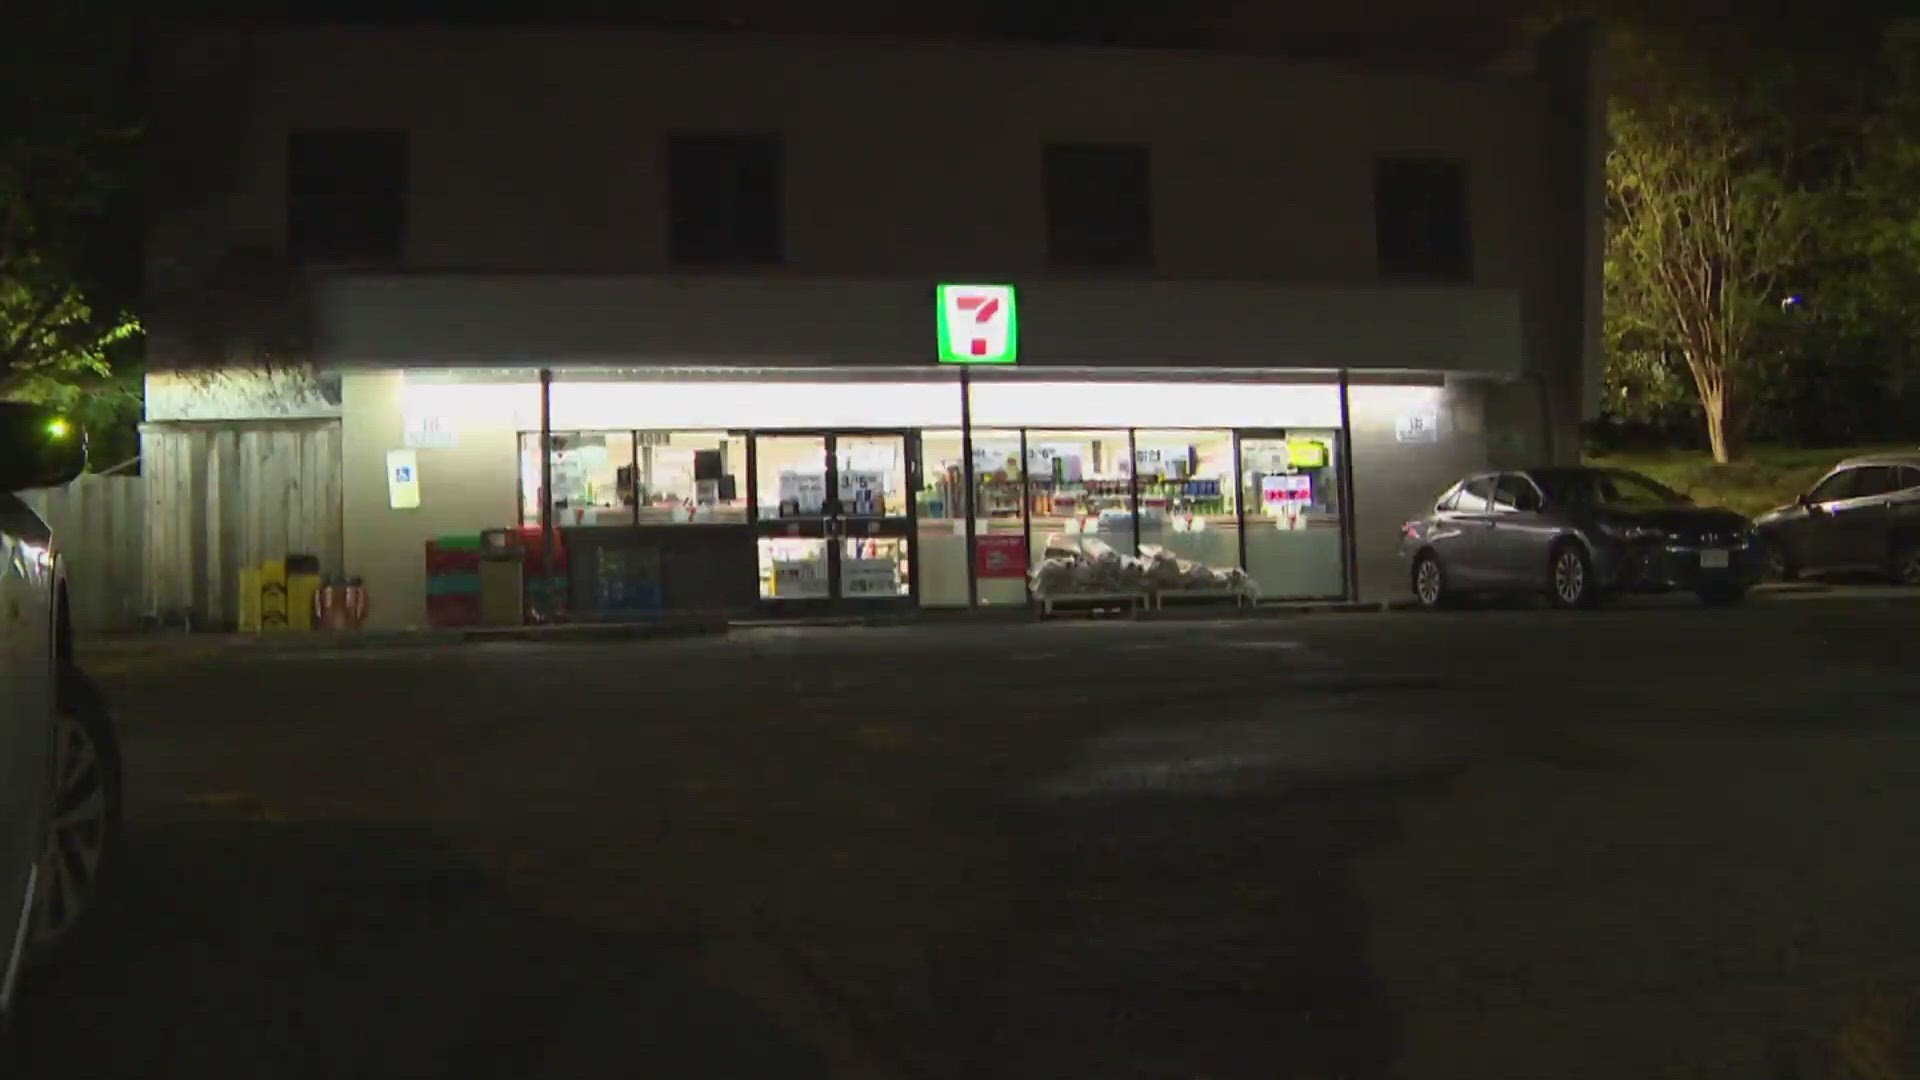 The clerk is expected to be OK, but the robber did make off with some cash.